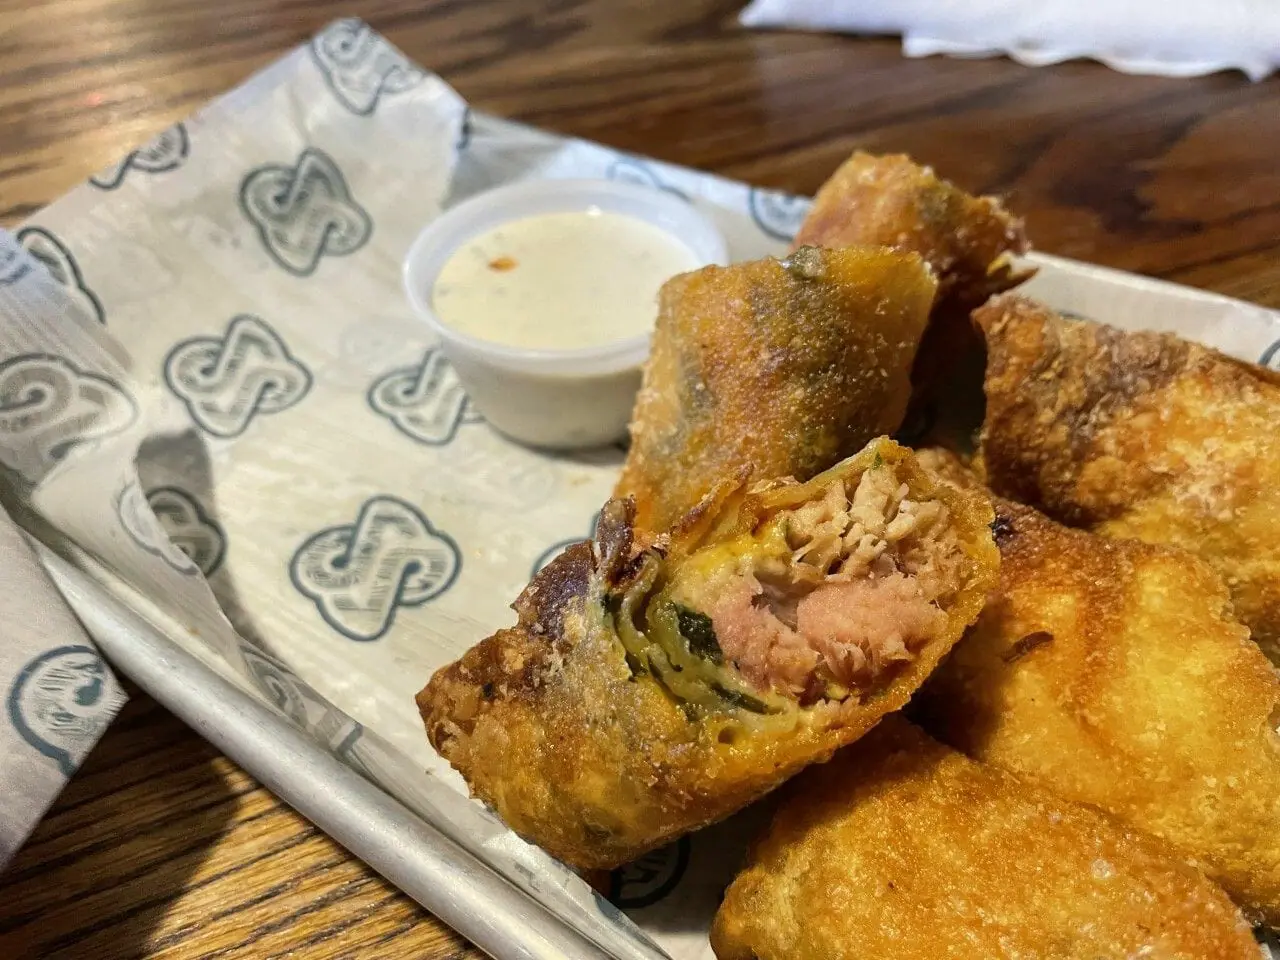 Real Restaurant Review: Doc’s Porchside Transformation